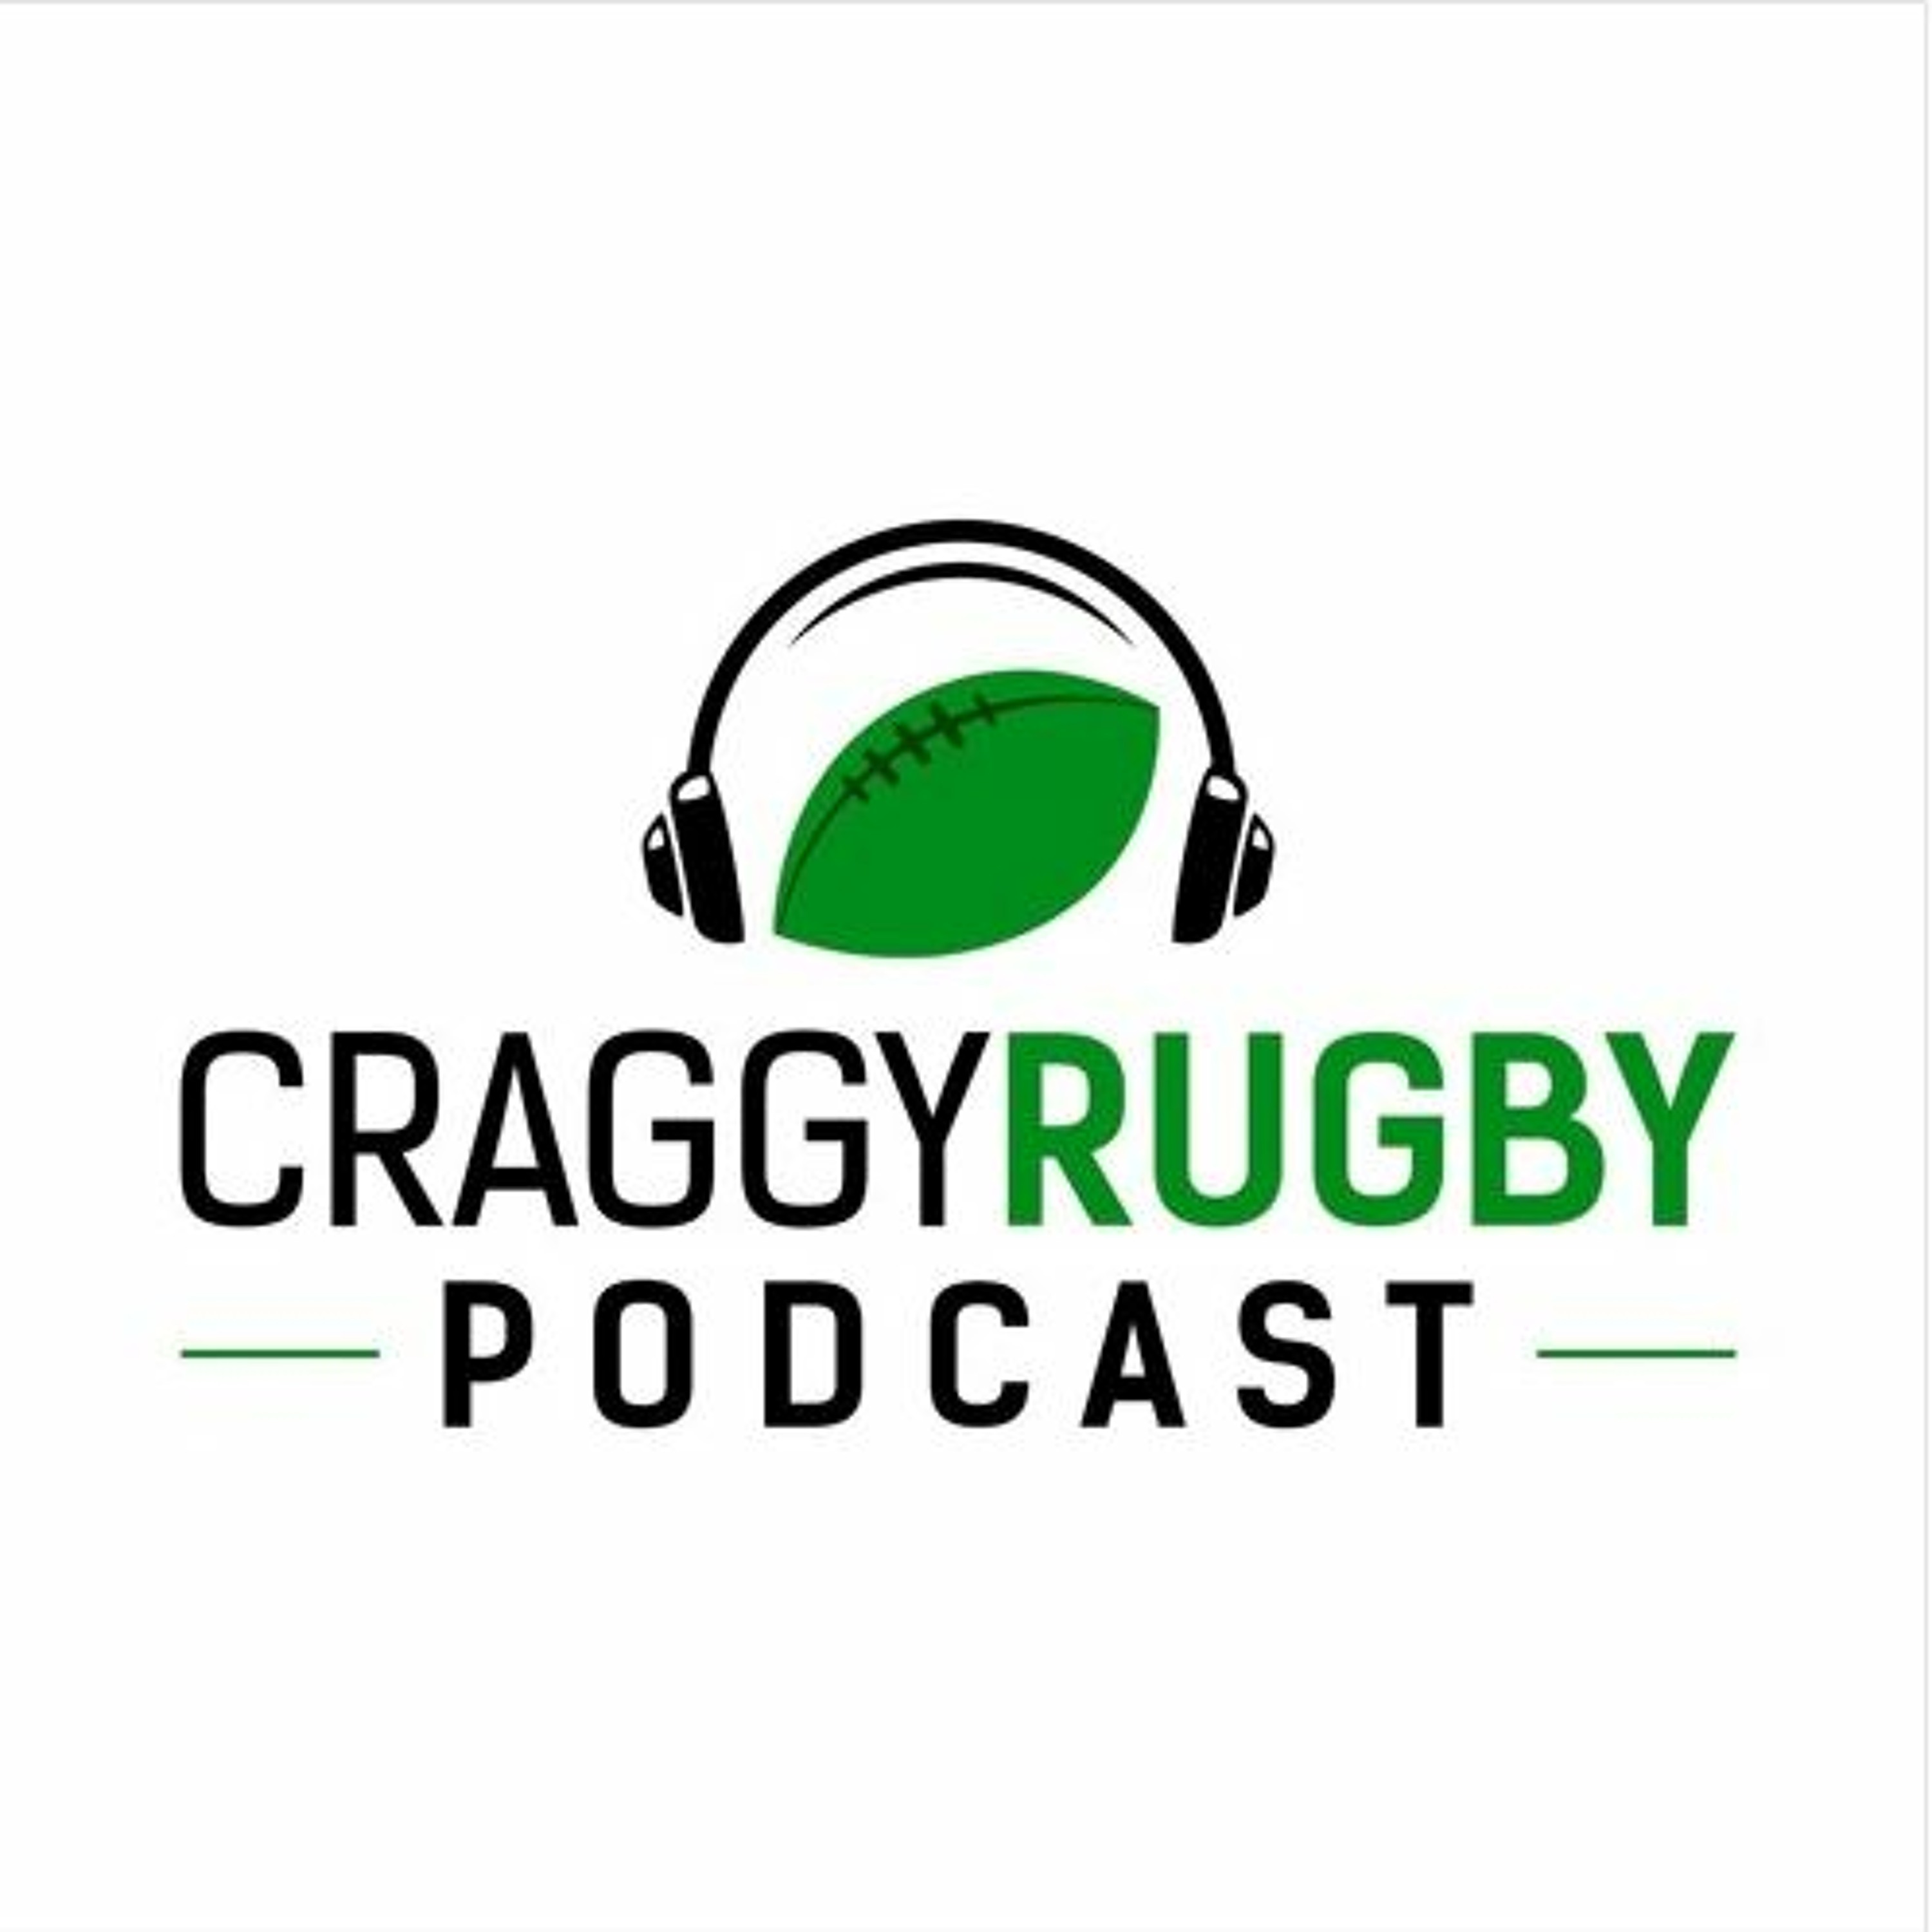 Muliaina Debut - Connacht 43 Zebre 3 - Craggy Rugby podcast